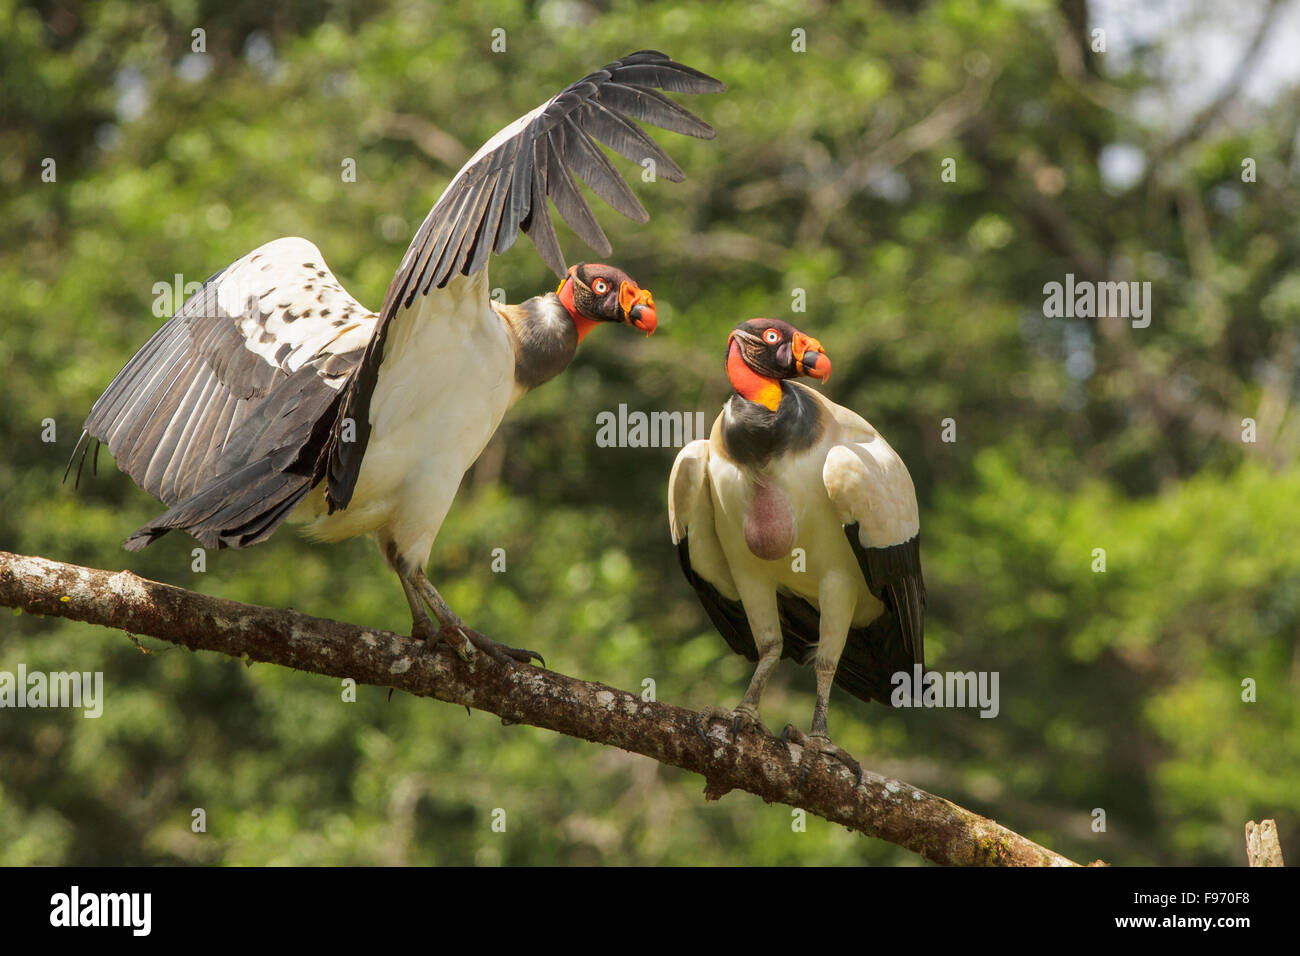 King Vulture (Sarcoramphus papa) perched on a branch in Costa Rica. Stock Photo